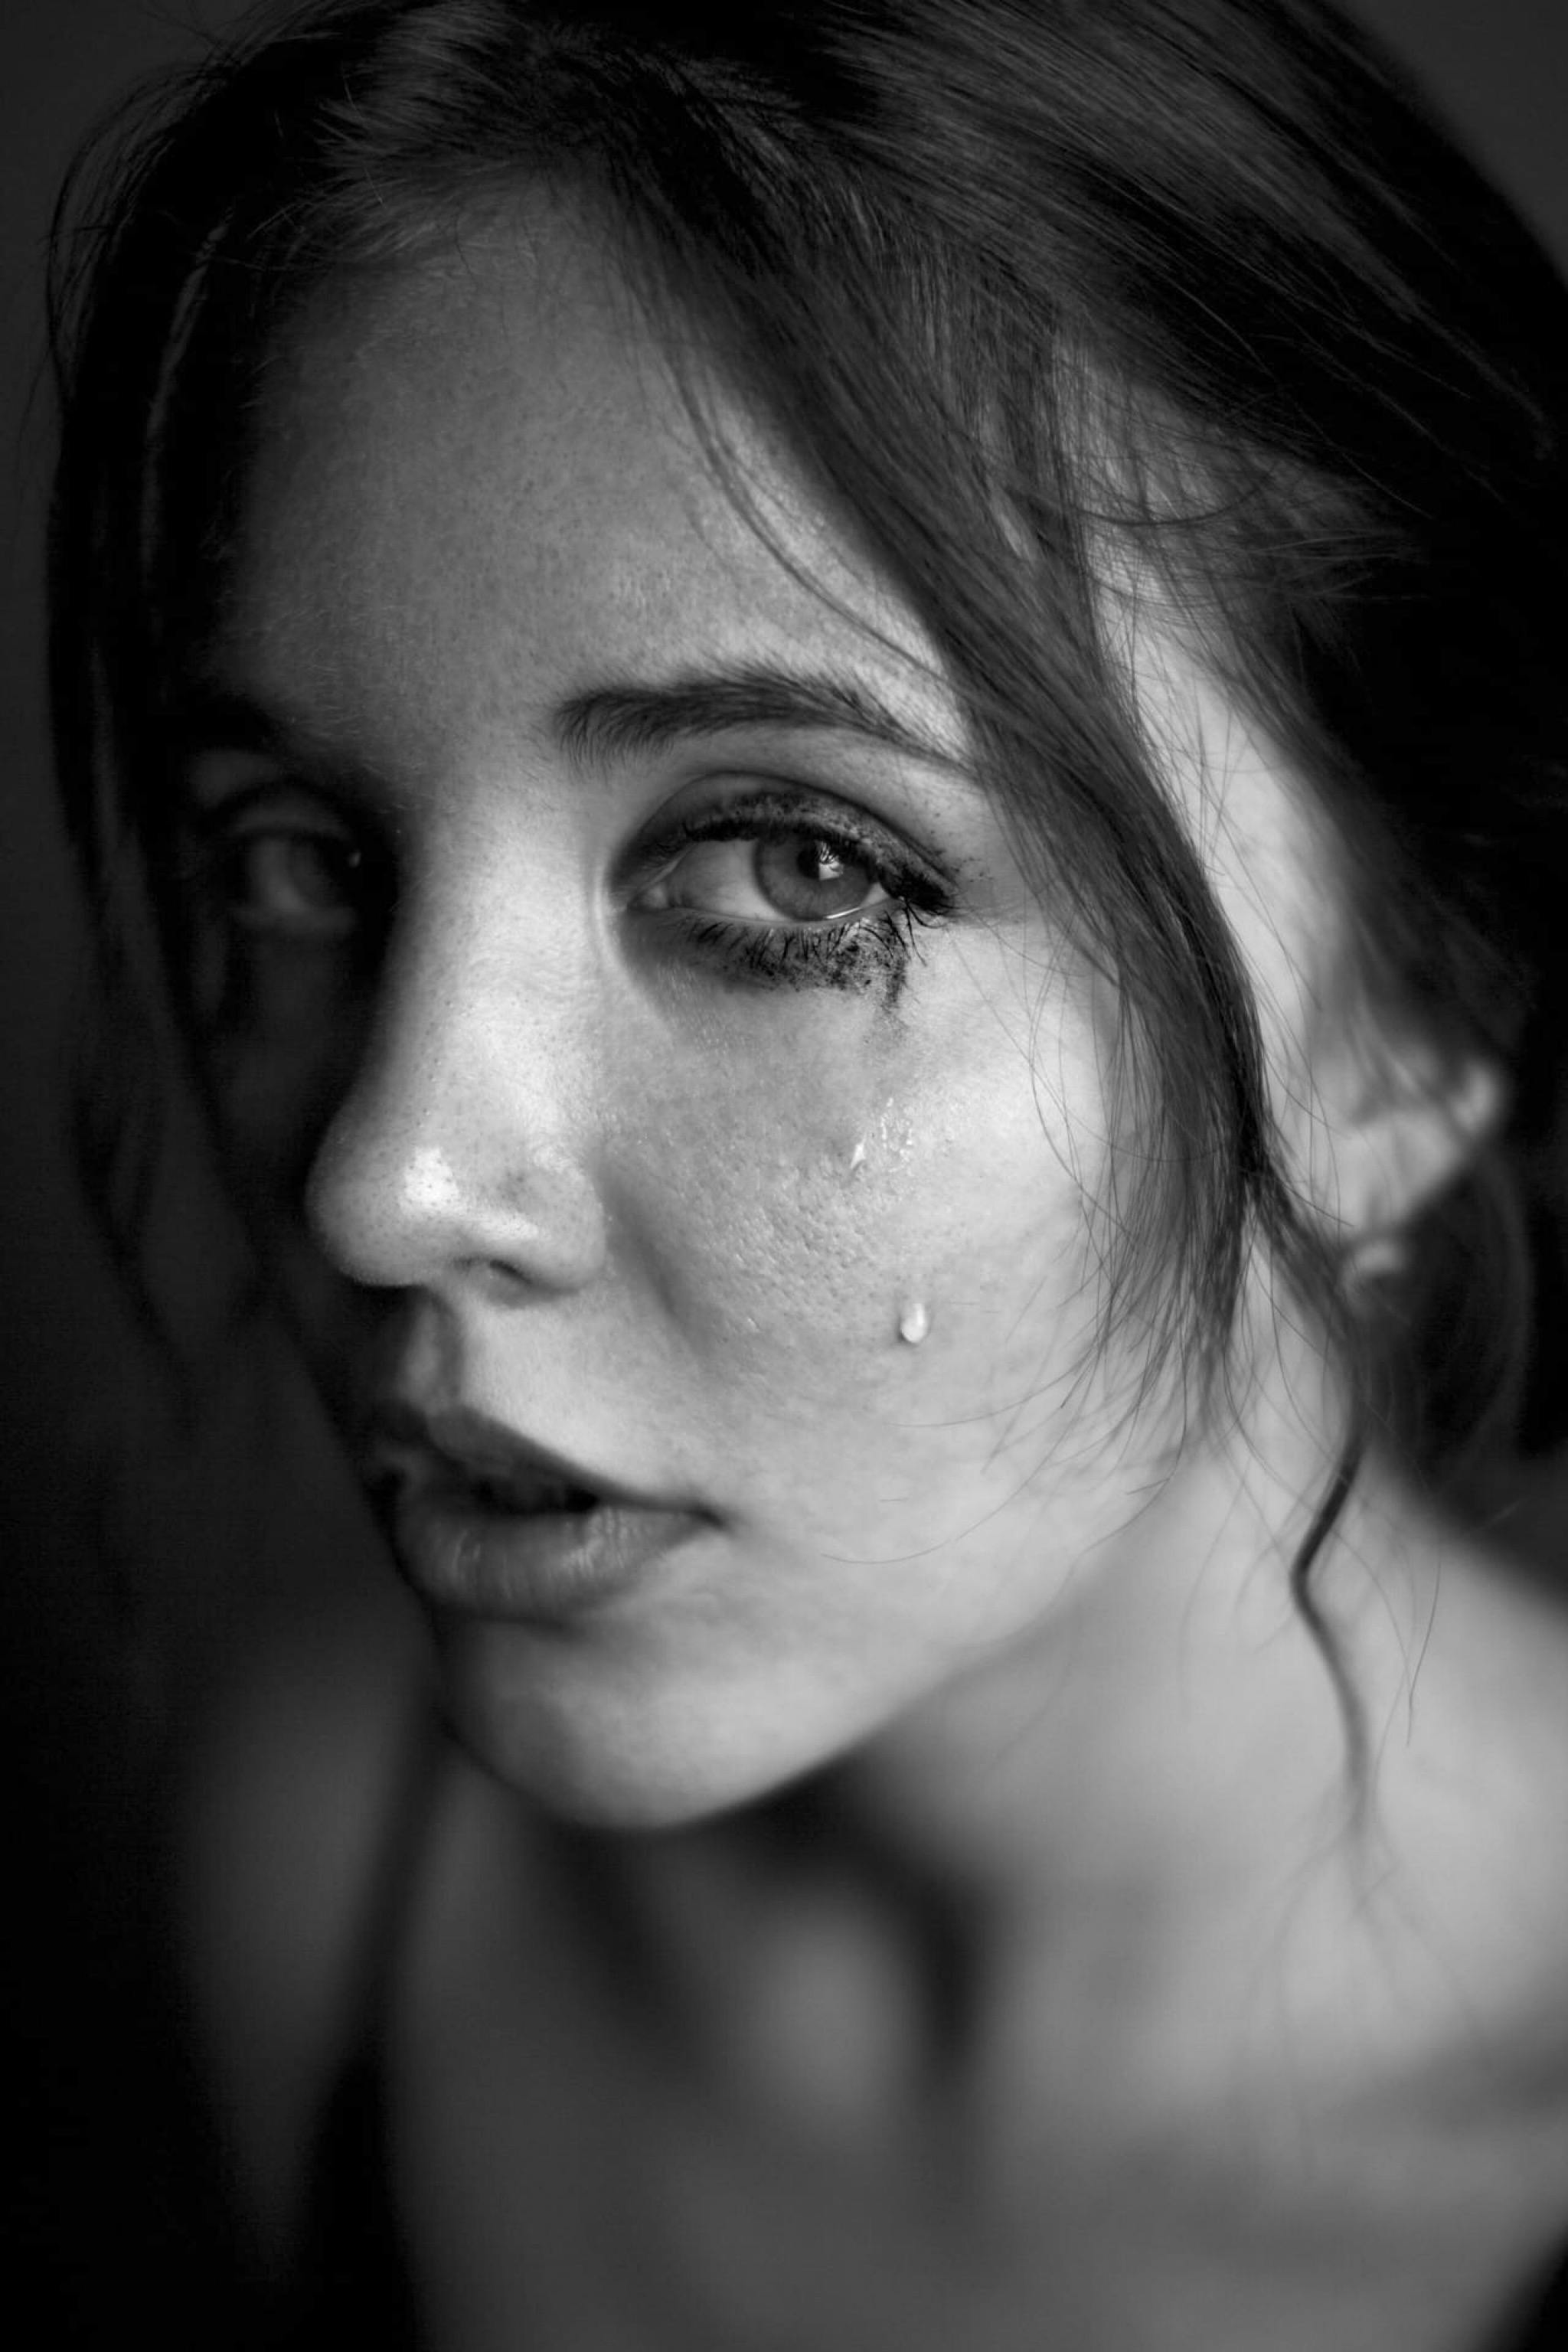 A crying woman | Source: Pexels